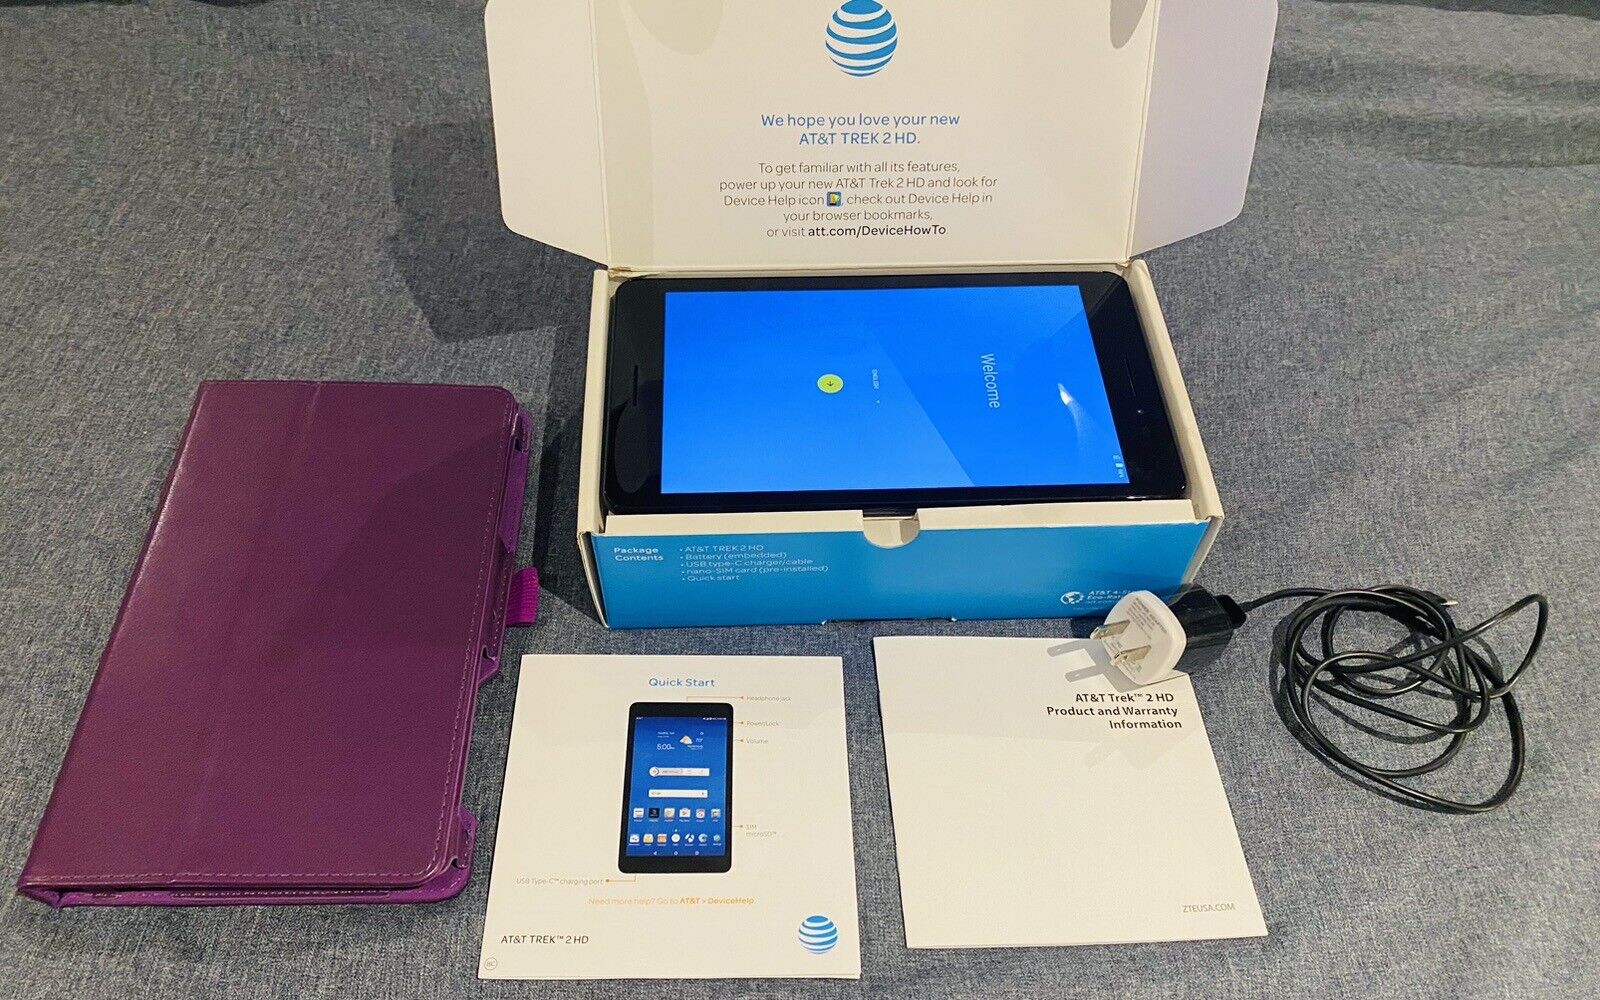 16G AT&T ZTE Trek 2 HD Tablet - Slightly Used With Original Box & Tablet Cover